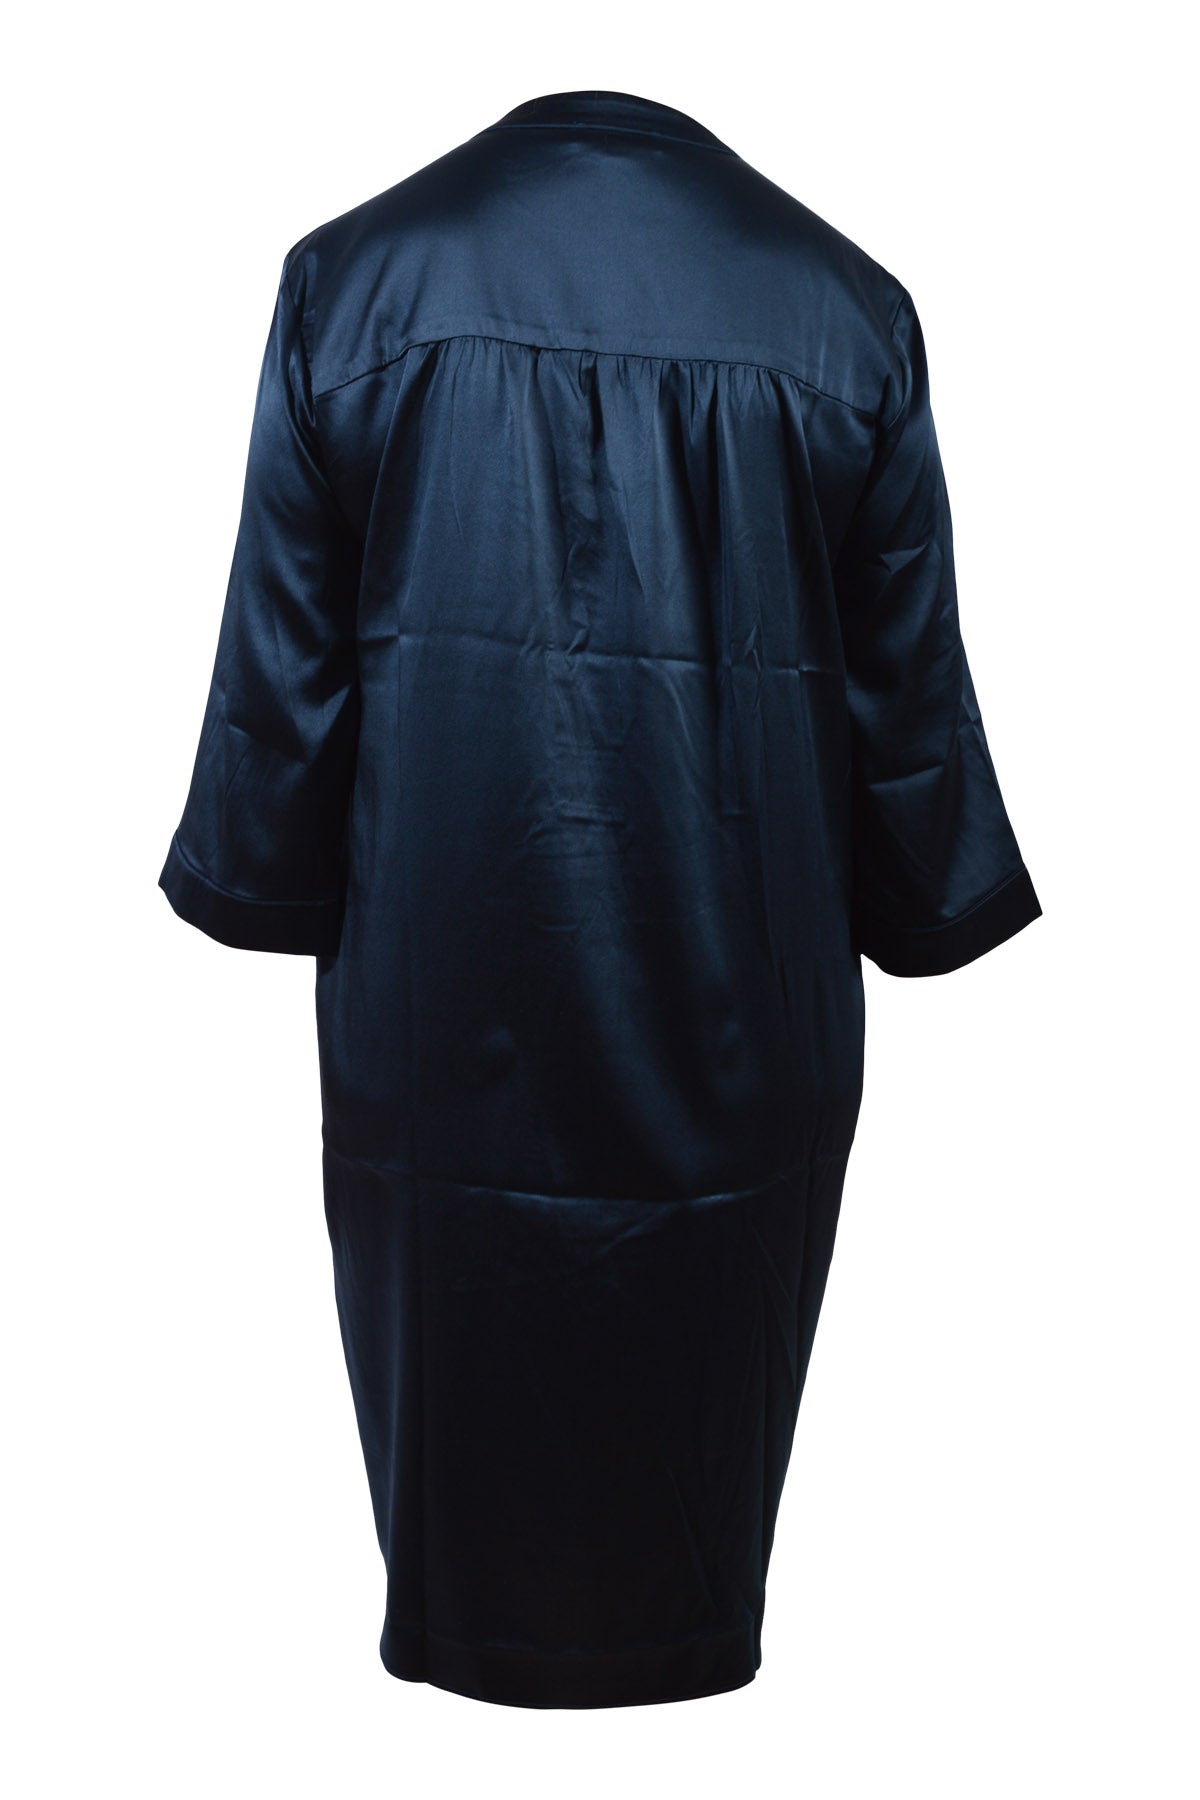 Charlotte Sparre Winter Bliss Dress 3021, Solid Satin Navy